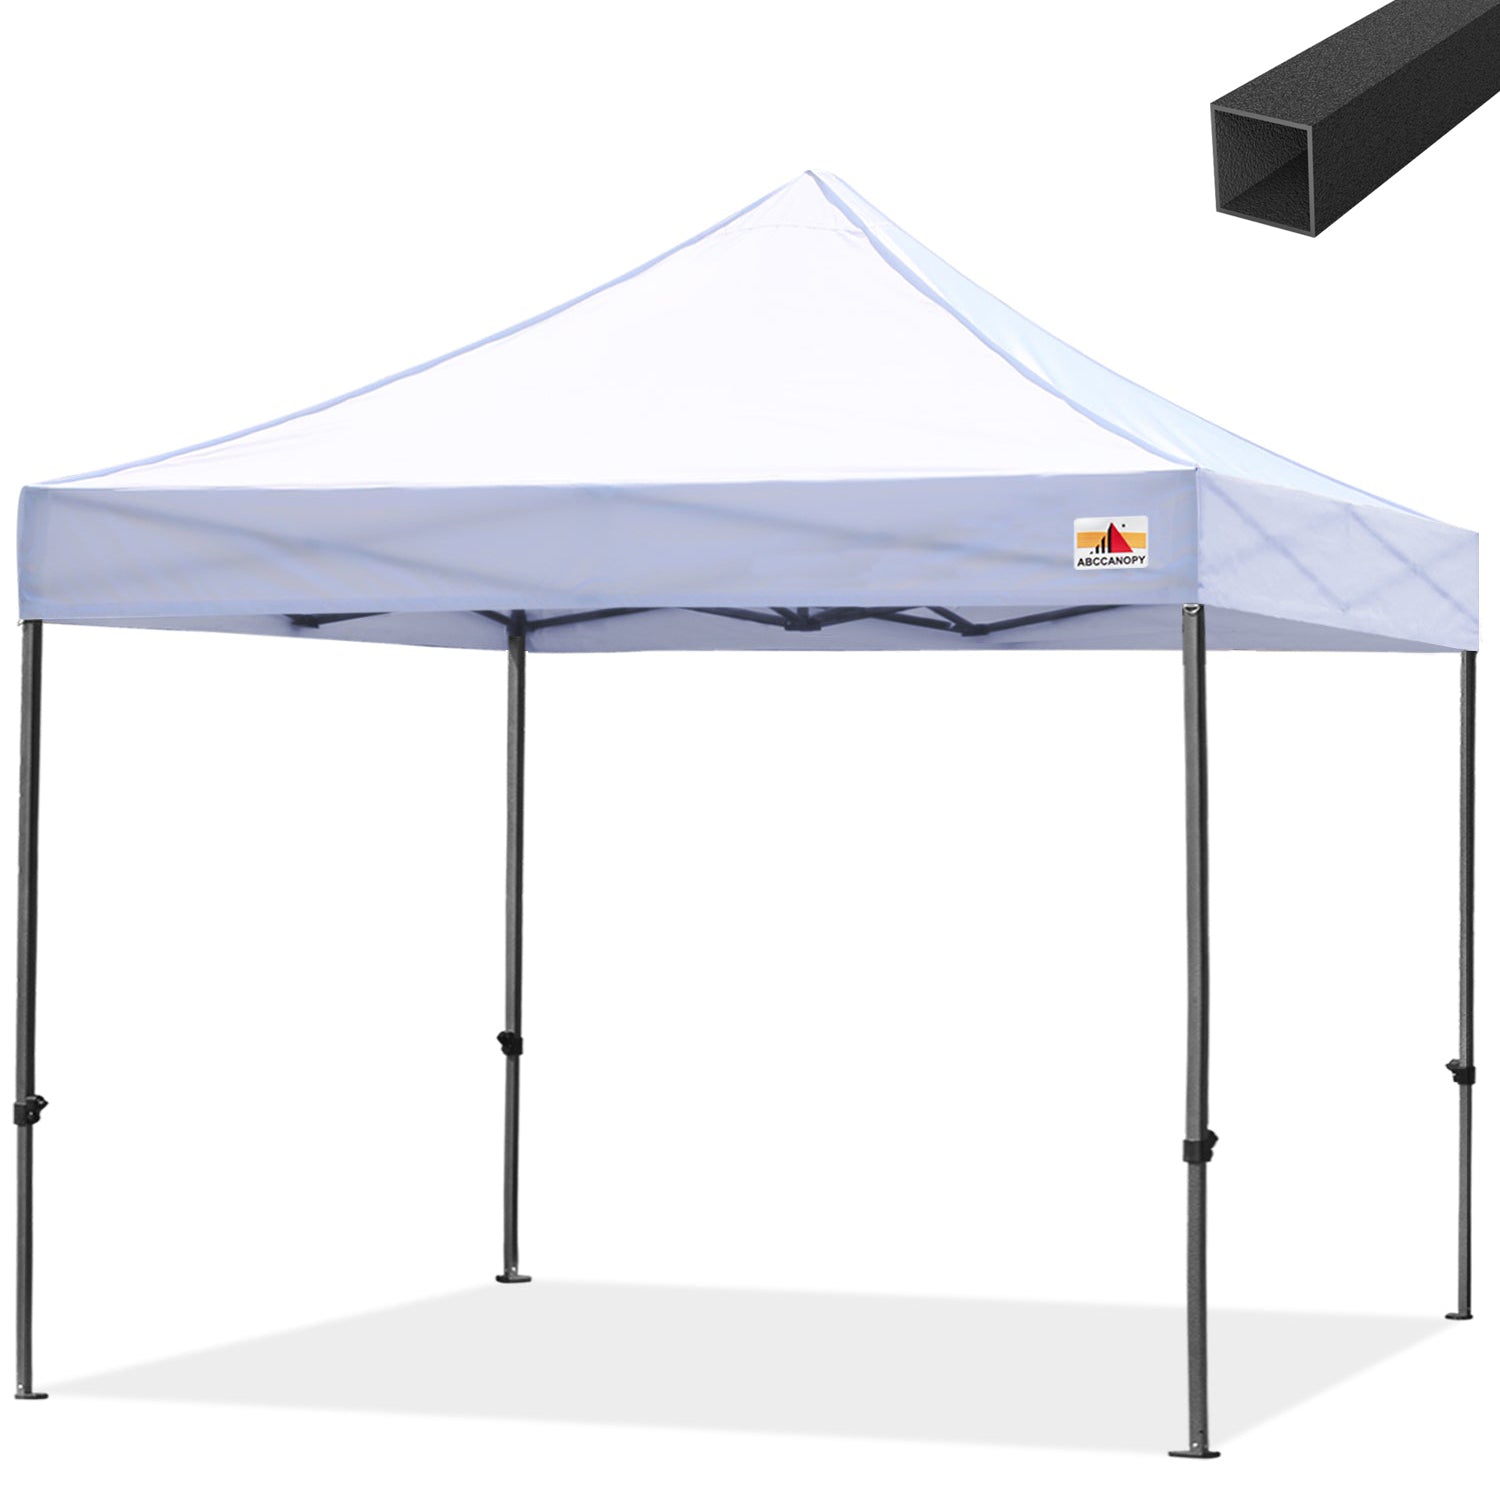 S1 Commercial 8x8/8x12/8x16 Canopy